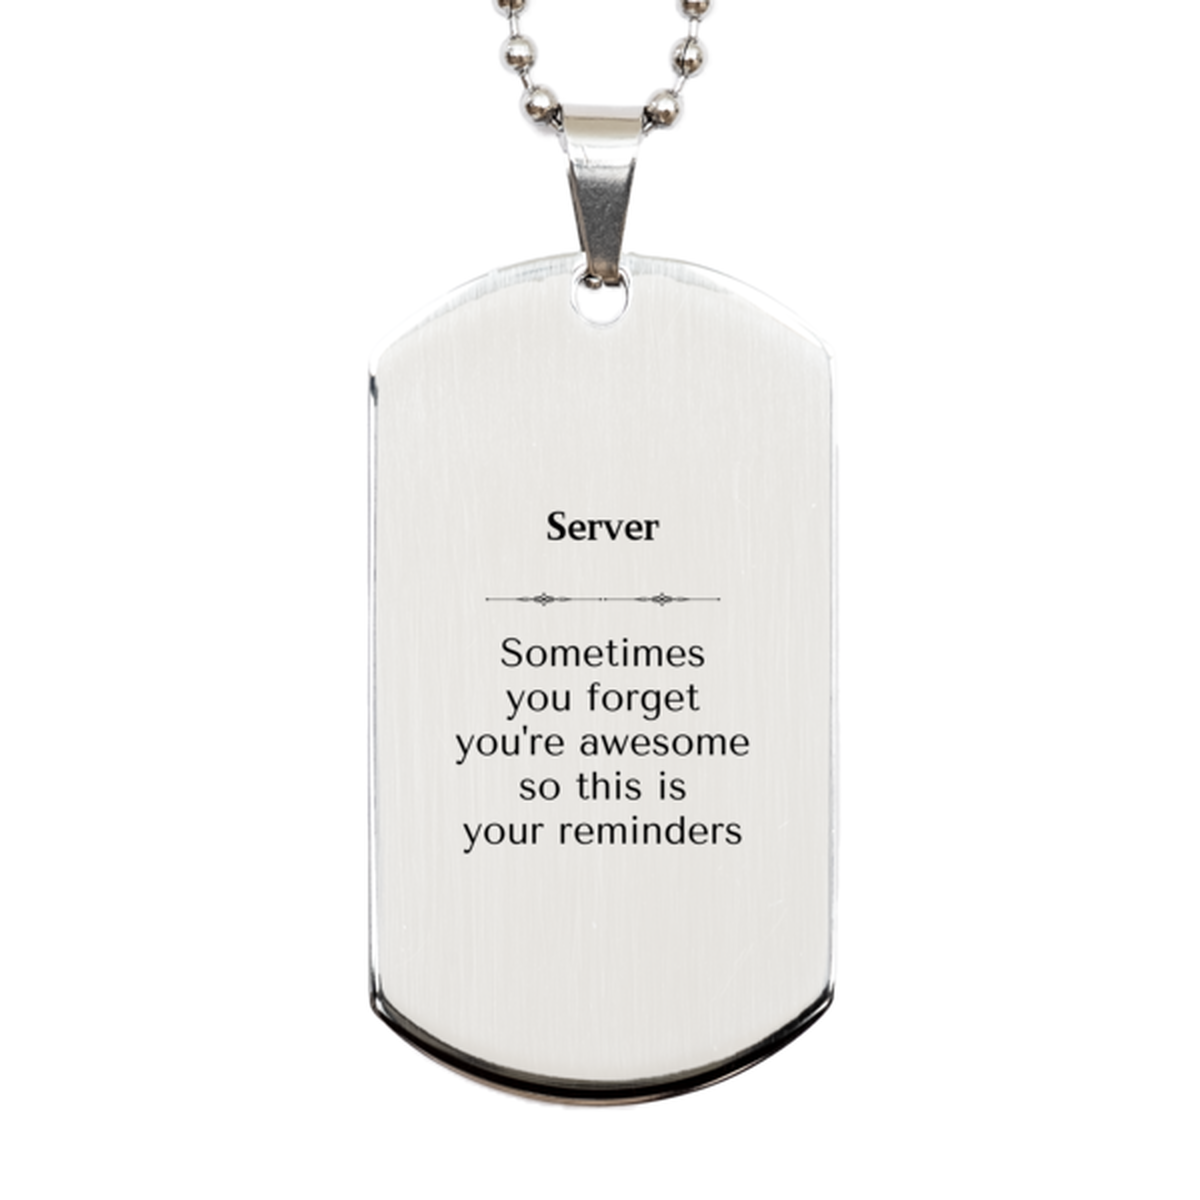 Sentimental Server Silver Dog Tag, Server Sometimes you forget you're awesome so this is your reminders, Graduation Christmas Birthday Gifts for Server, Men, Women, Coworkers